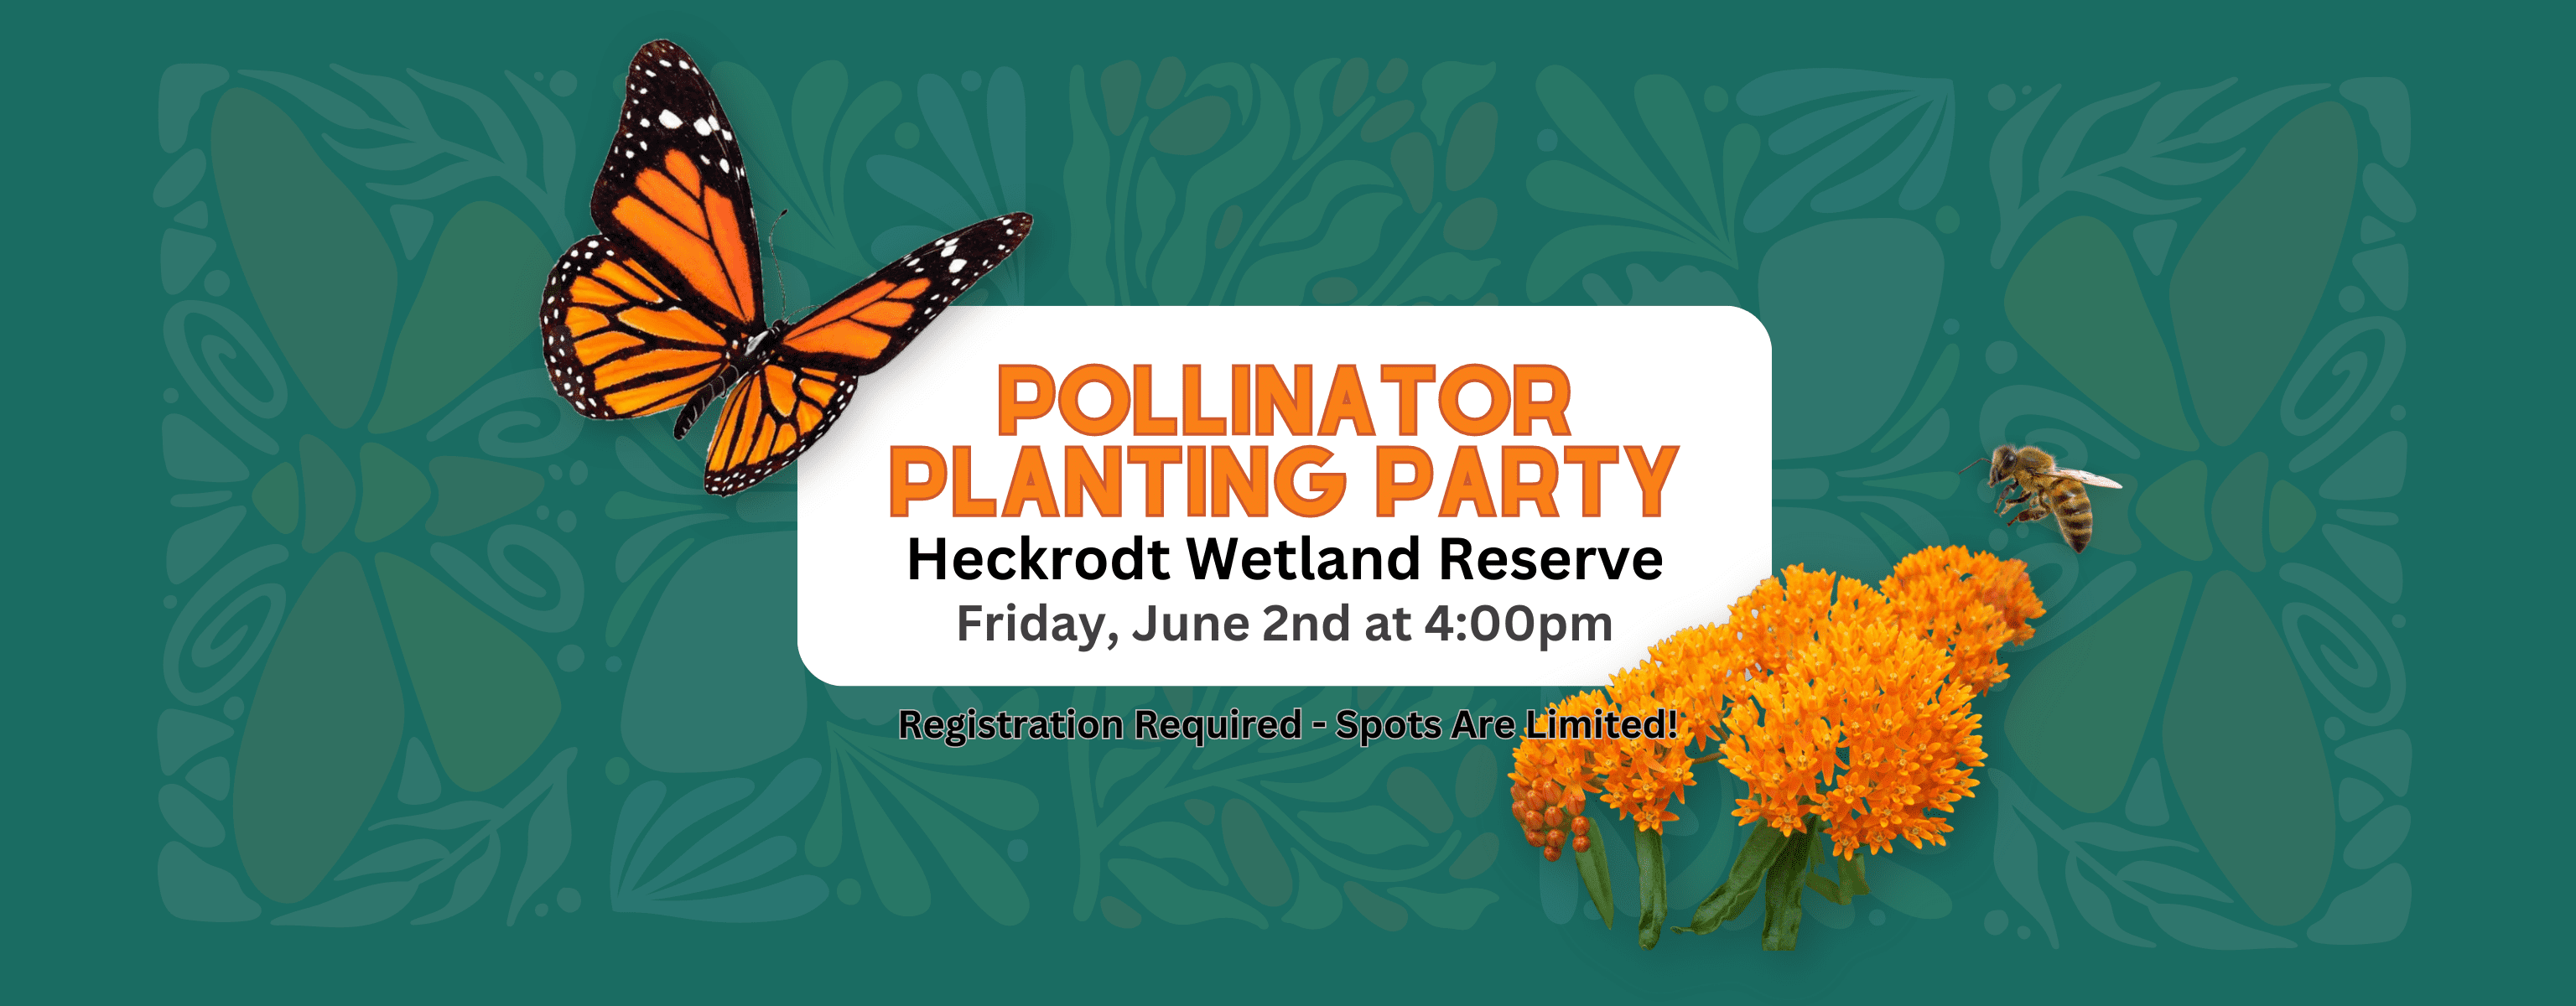 Pollinator Planting Party at Heckrodt Wetland Reserve Friday, June 2nd 2023 at 4:00pm